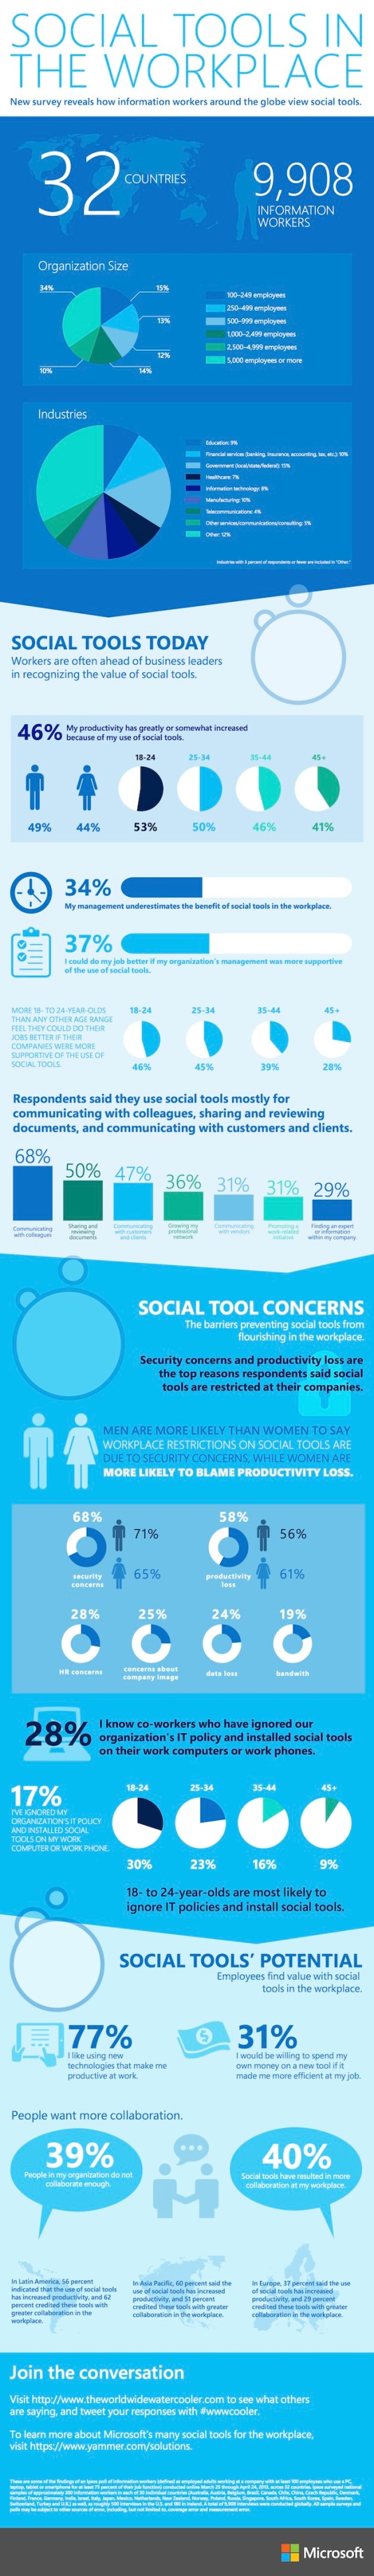 social-tools-in-the-workplace-infographic